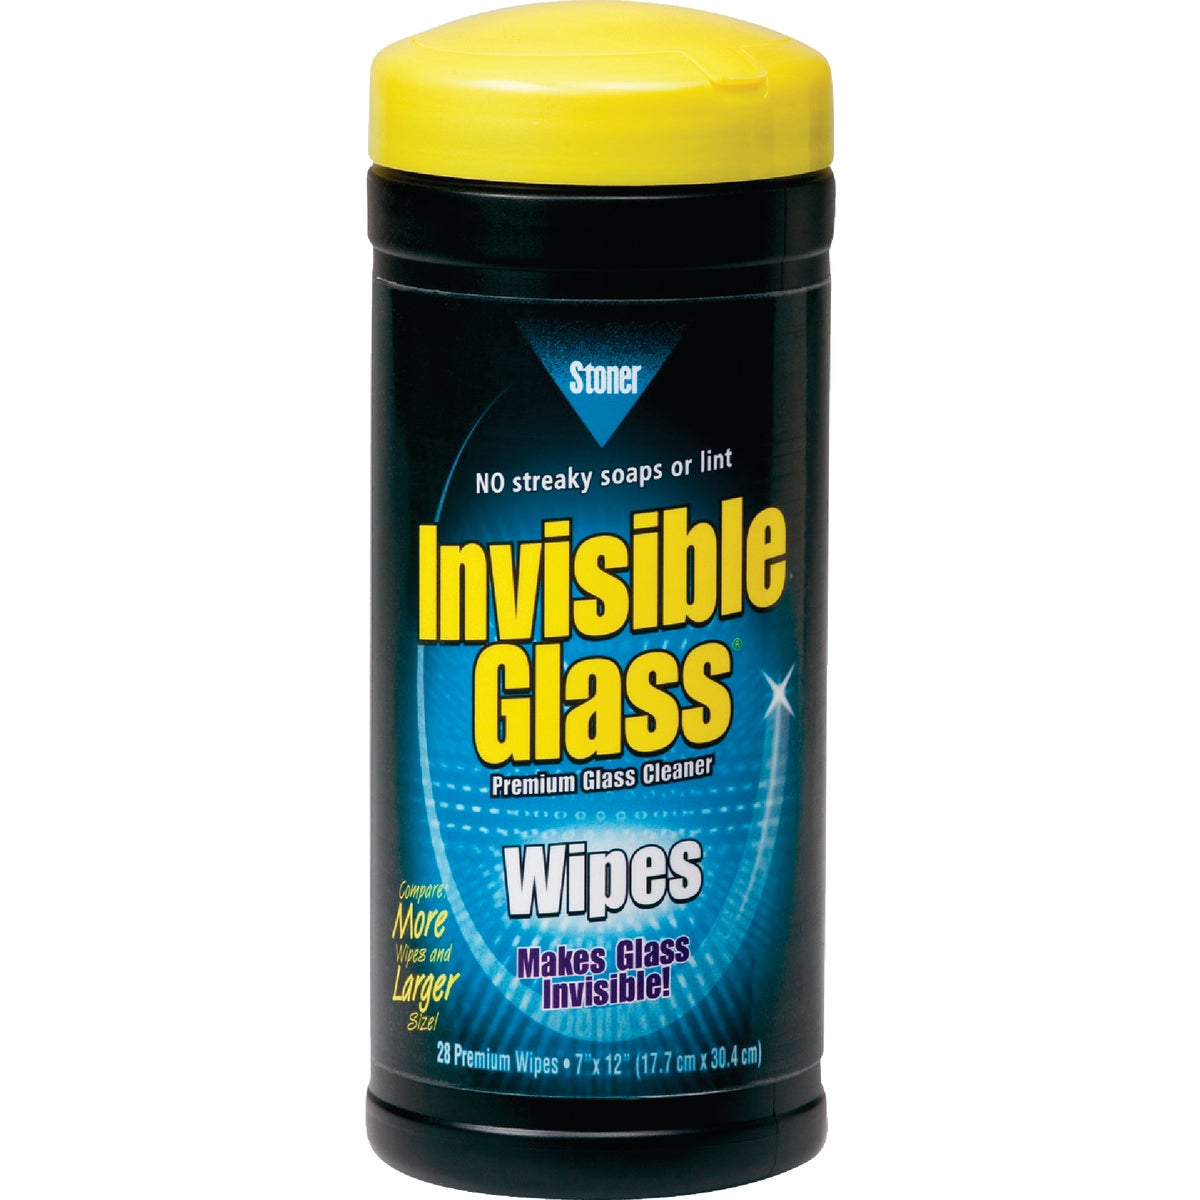 Invisible Glass Stoner 90166 Stoner Invisible Glass Glass Cleaner Wipes (28-Count) 90166